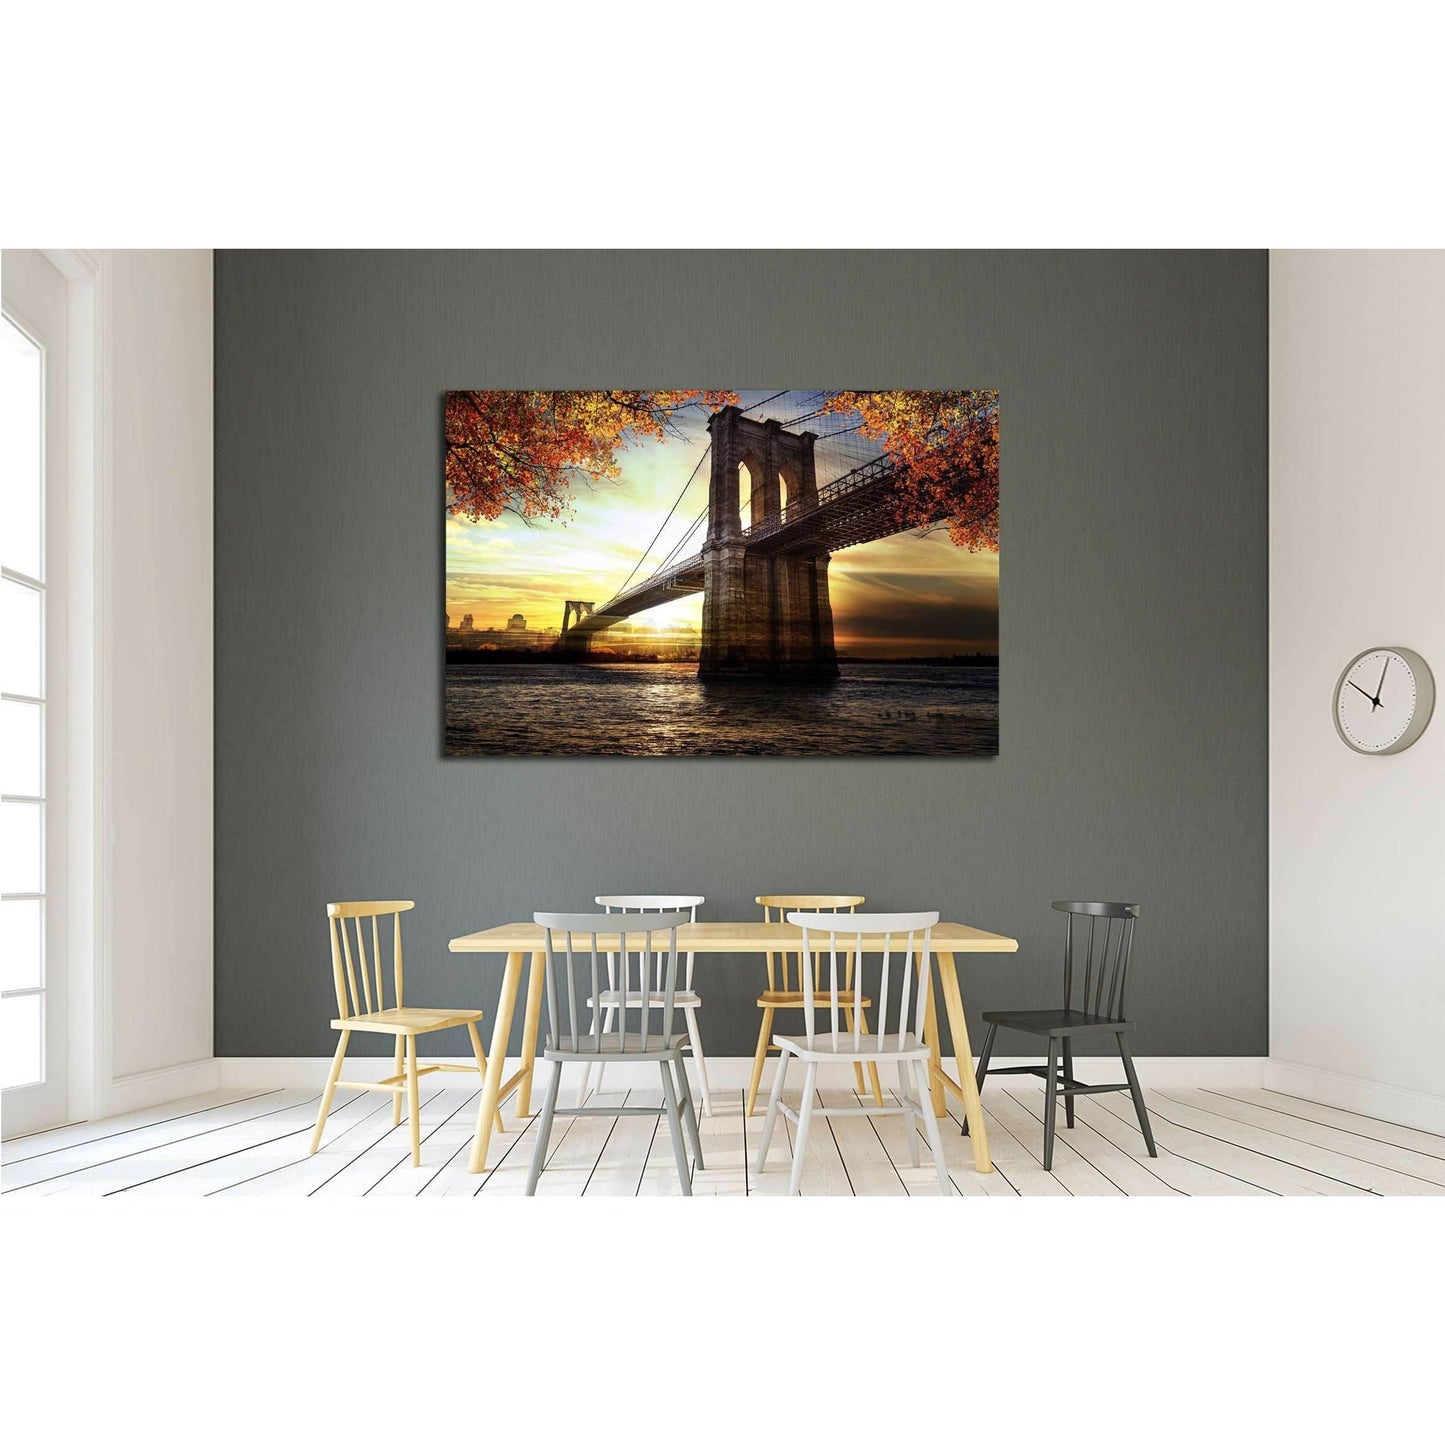 Autumn Sunset Brooklyn Bridge Canvas for Urban Home DecorThis canvas print showcases the Brooklyn Bridge at sunset, framed by the warm autumnal foliage. The sun's reflection on the water and the silhouette of the city skyline in the background add depth a